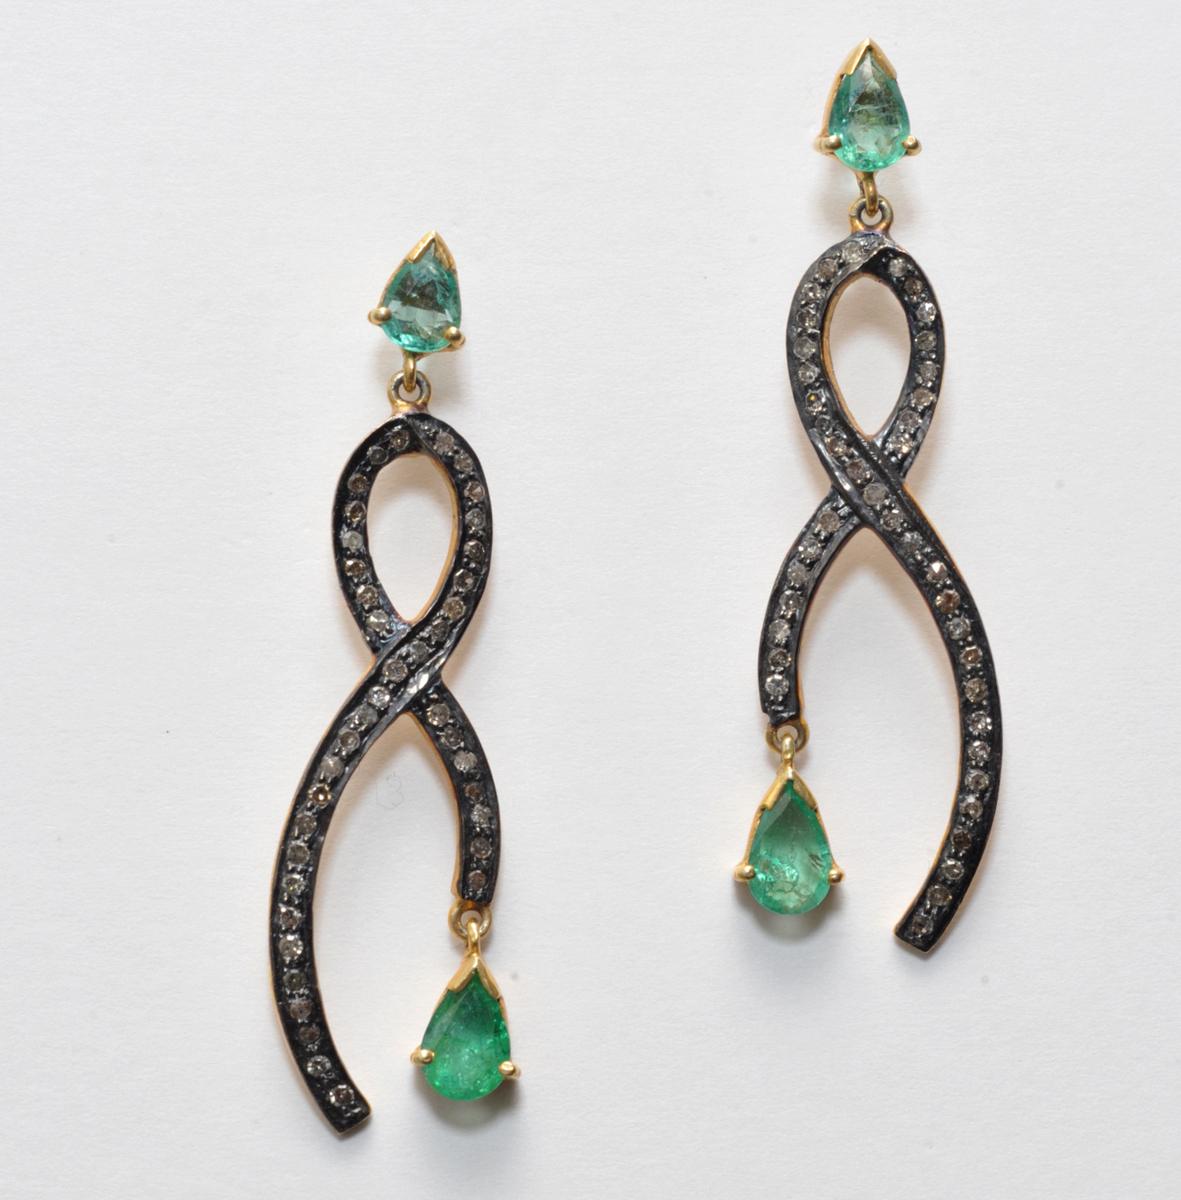 Pair of earrings with pear-shaped faceted emeralds set in 18K gold on the post and dangle.  The body of the earrings are pave`set diamonds in oxidized sterling.